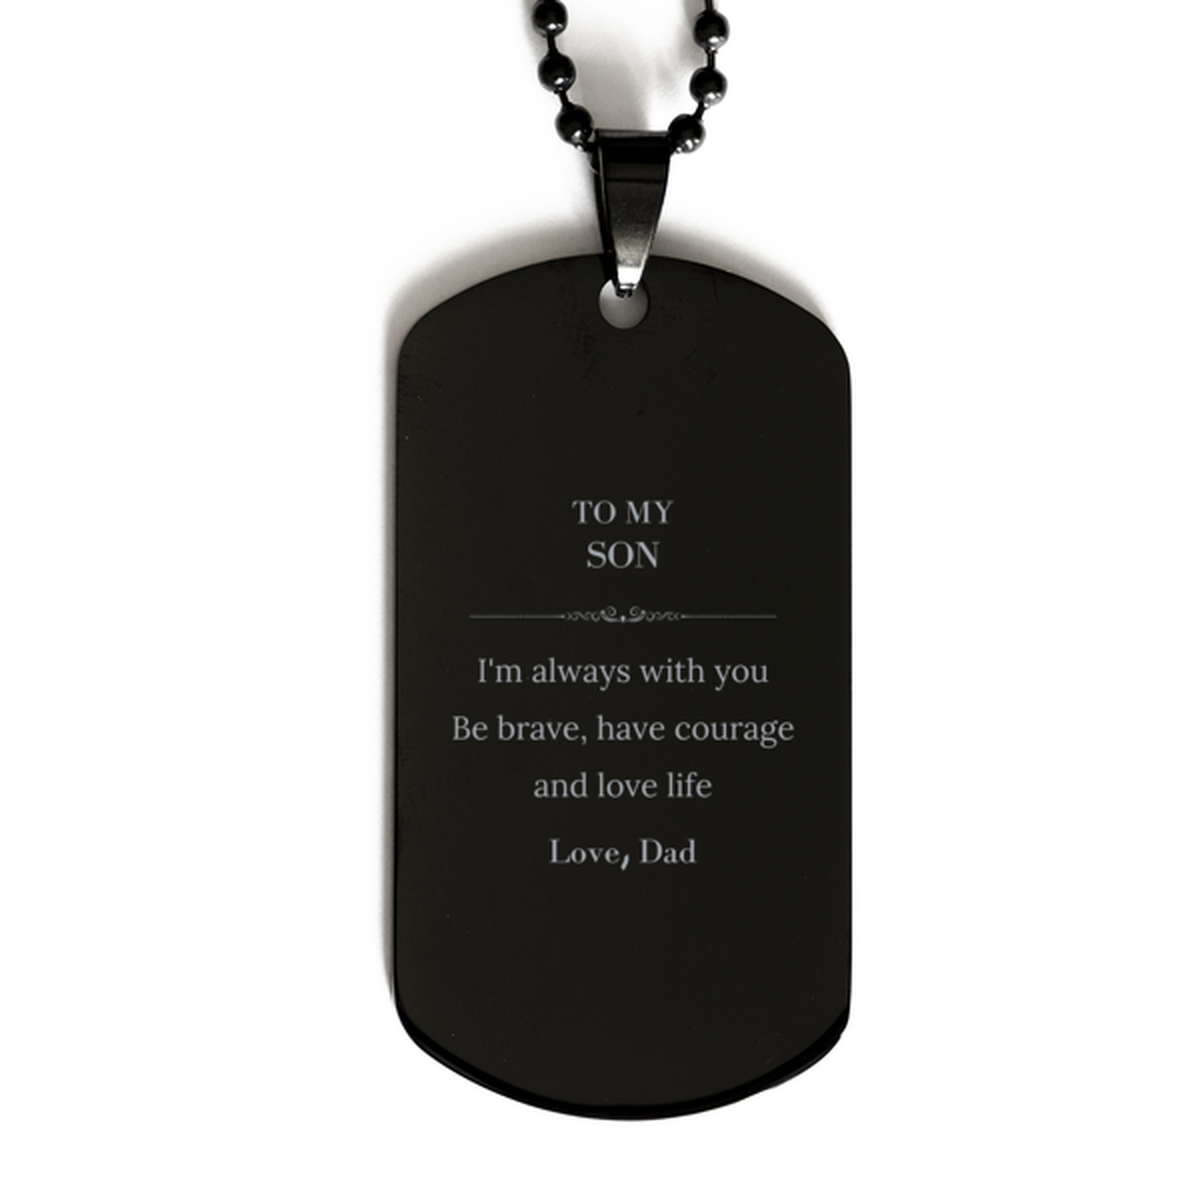 To My Son Gifts from Dad, Unique Black Dog Tag Inspirational Christmas Birthday Graduation Gifts for Son I'm always with you. Be brave, have courage and love life. Love, Dad